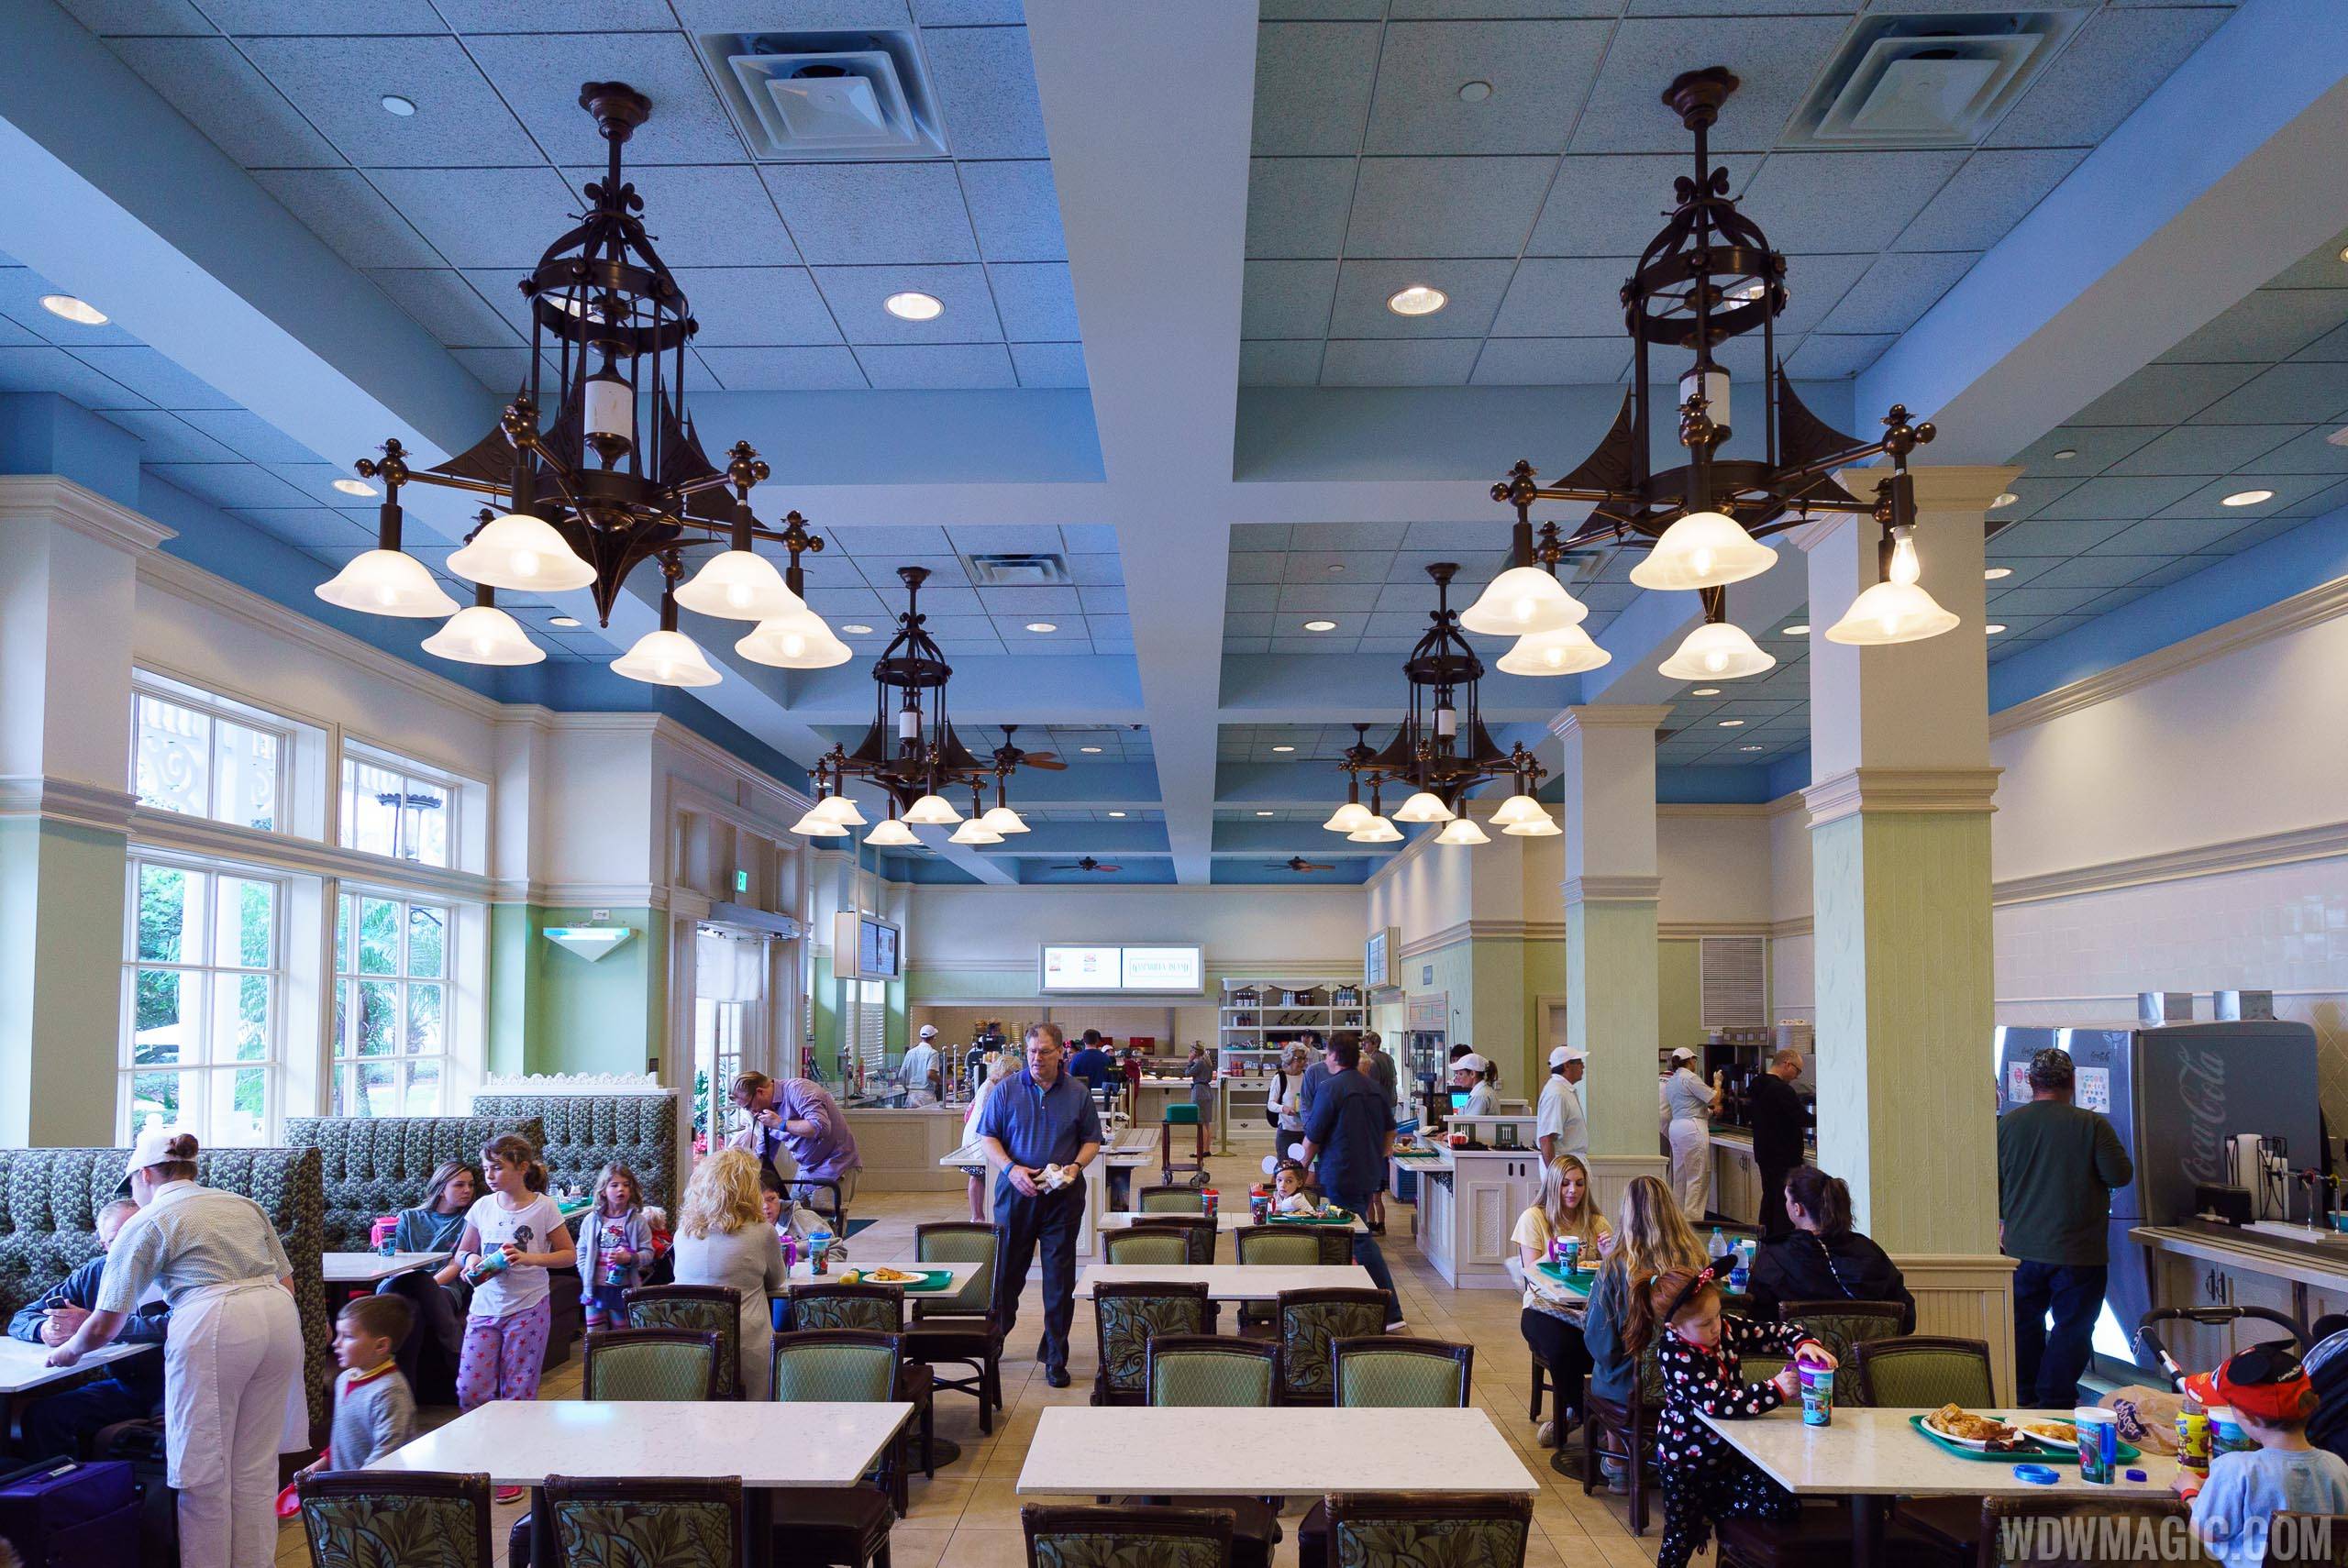 Gasparilla Island Grill reopens after 2 month refurbishment